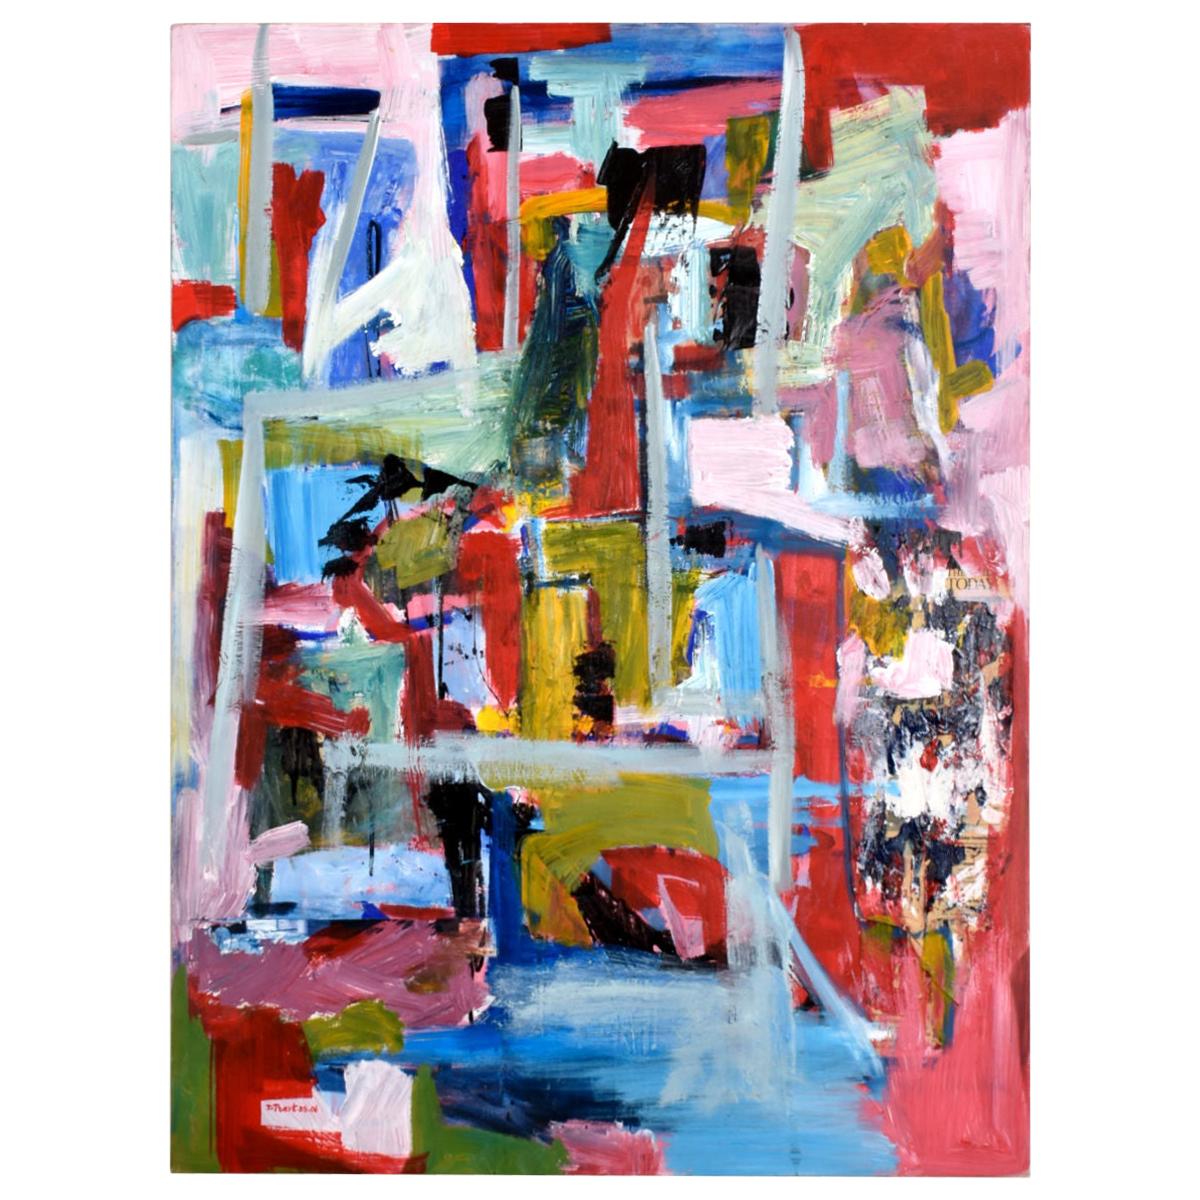 D Puertas Abstract Expressionist Painting in Red Blue and Yellow